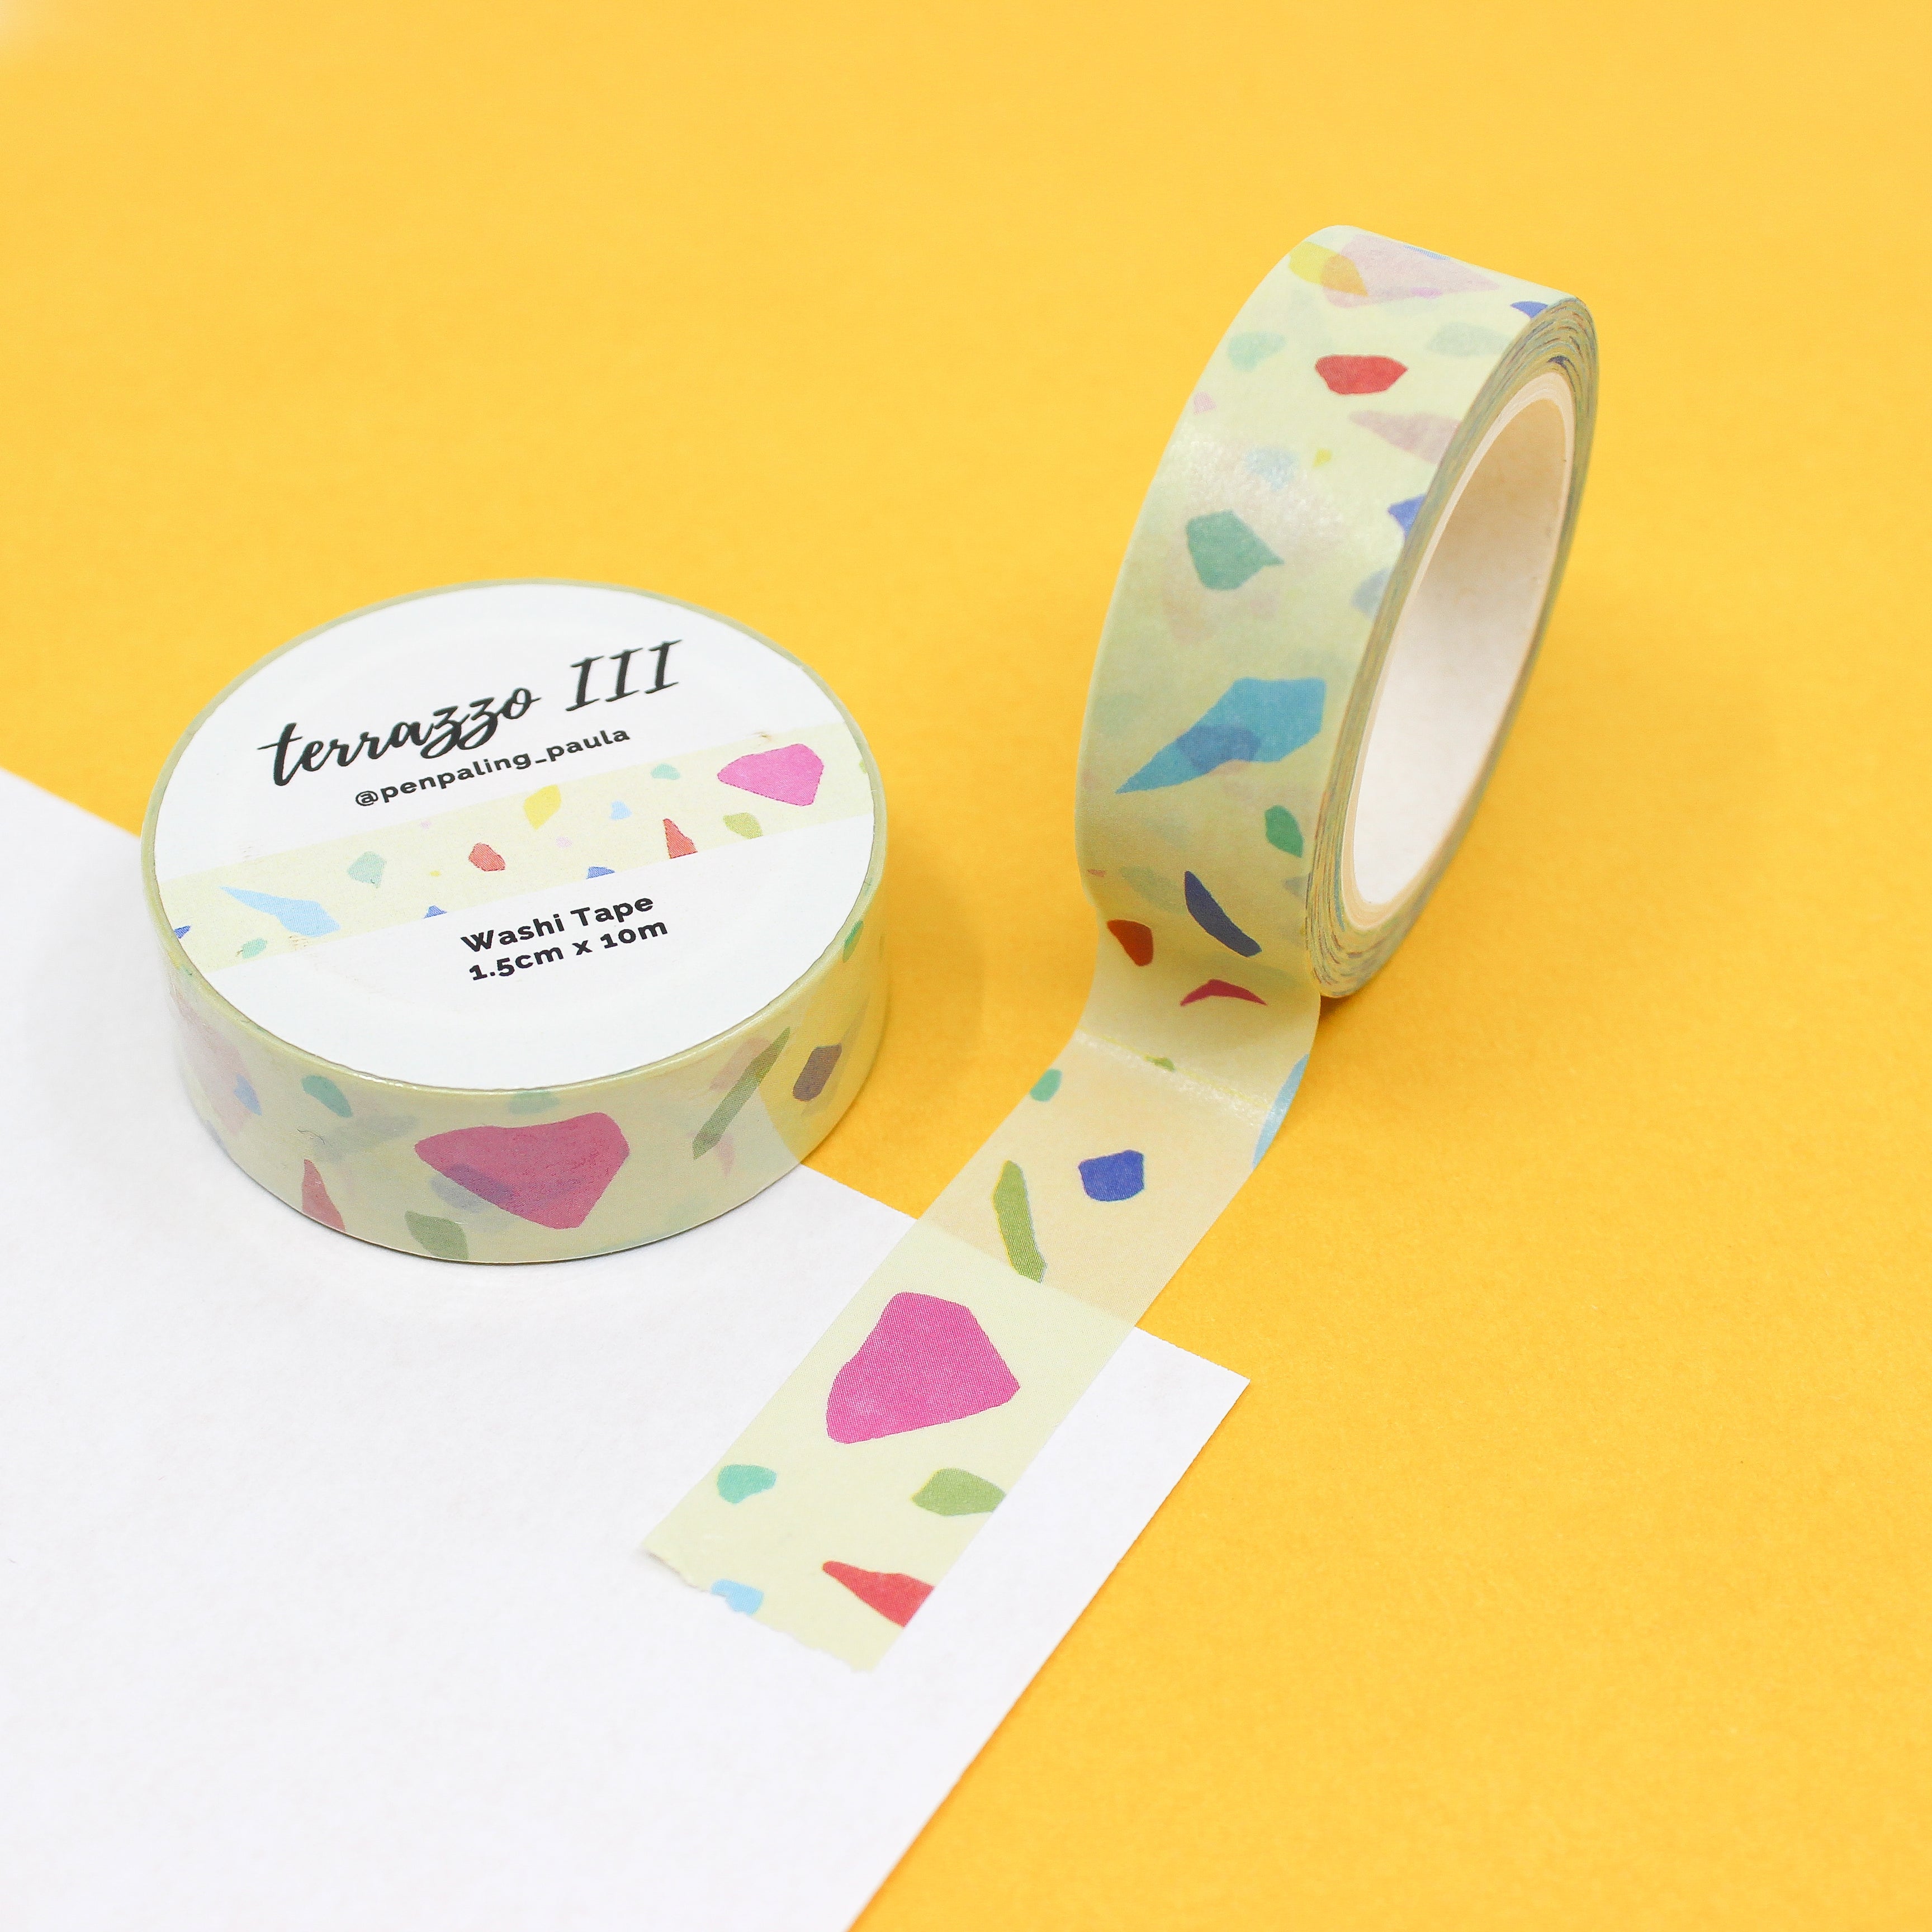 This is a yellow terrazzo themed washi tape from BBB Supplies Craft Shop